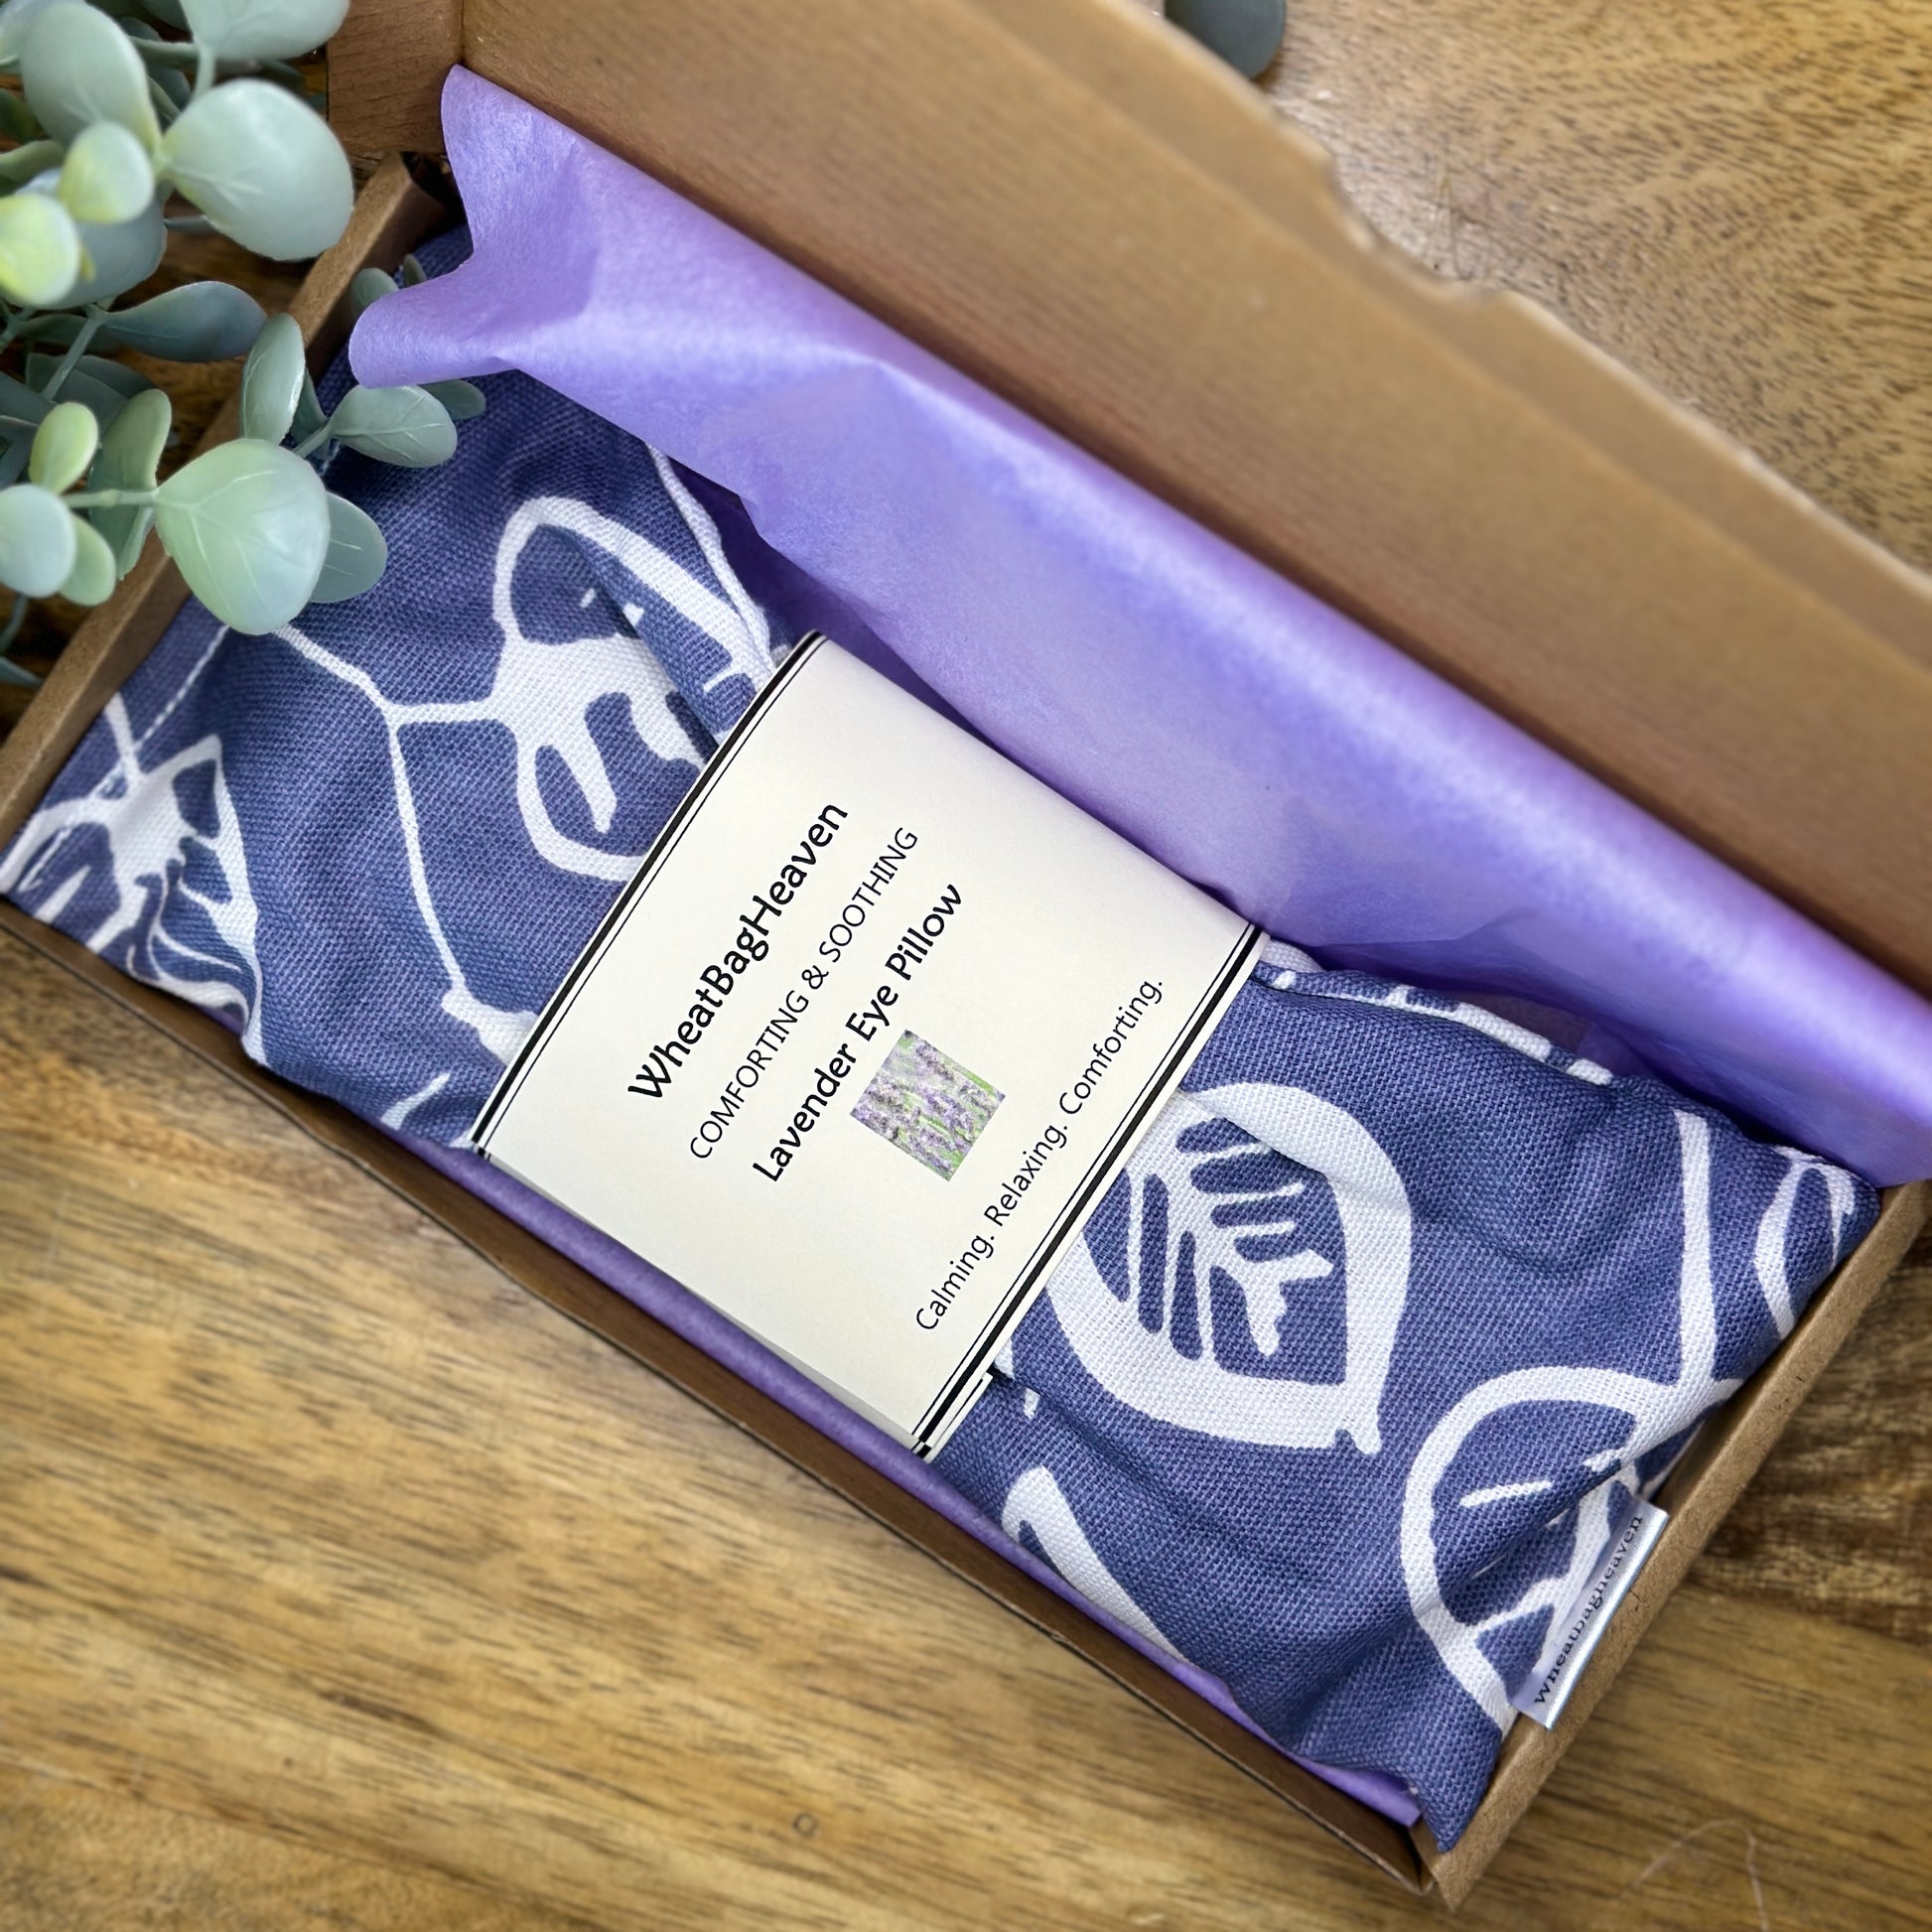 denim blue flax seed and lavender eye pillow in a letterbox sized postal box